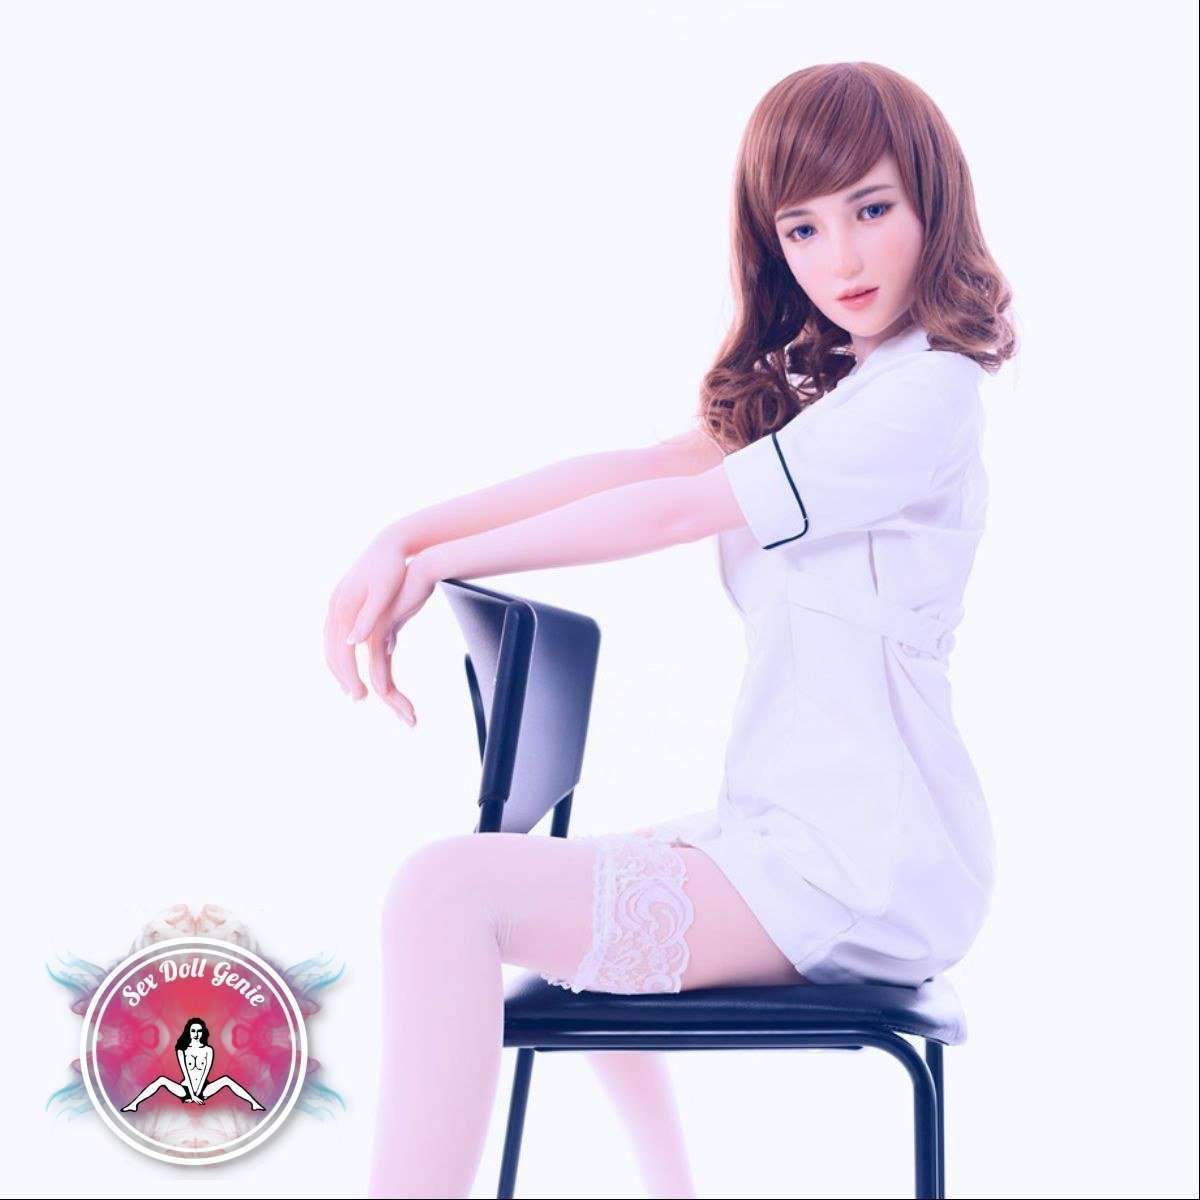 DS Doll - 167cm - Jiaxin Head - Type 1 D Cup Silicone Doll-8